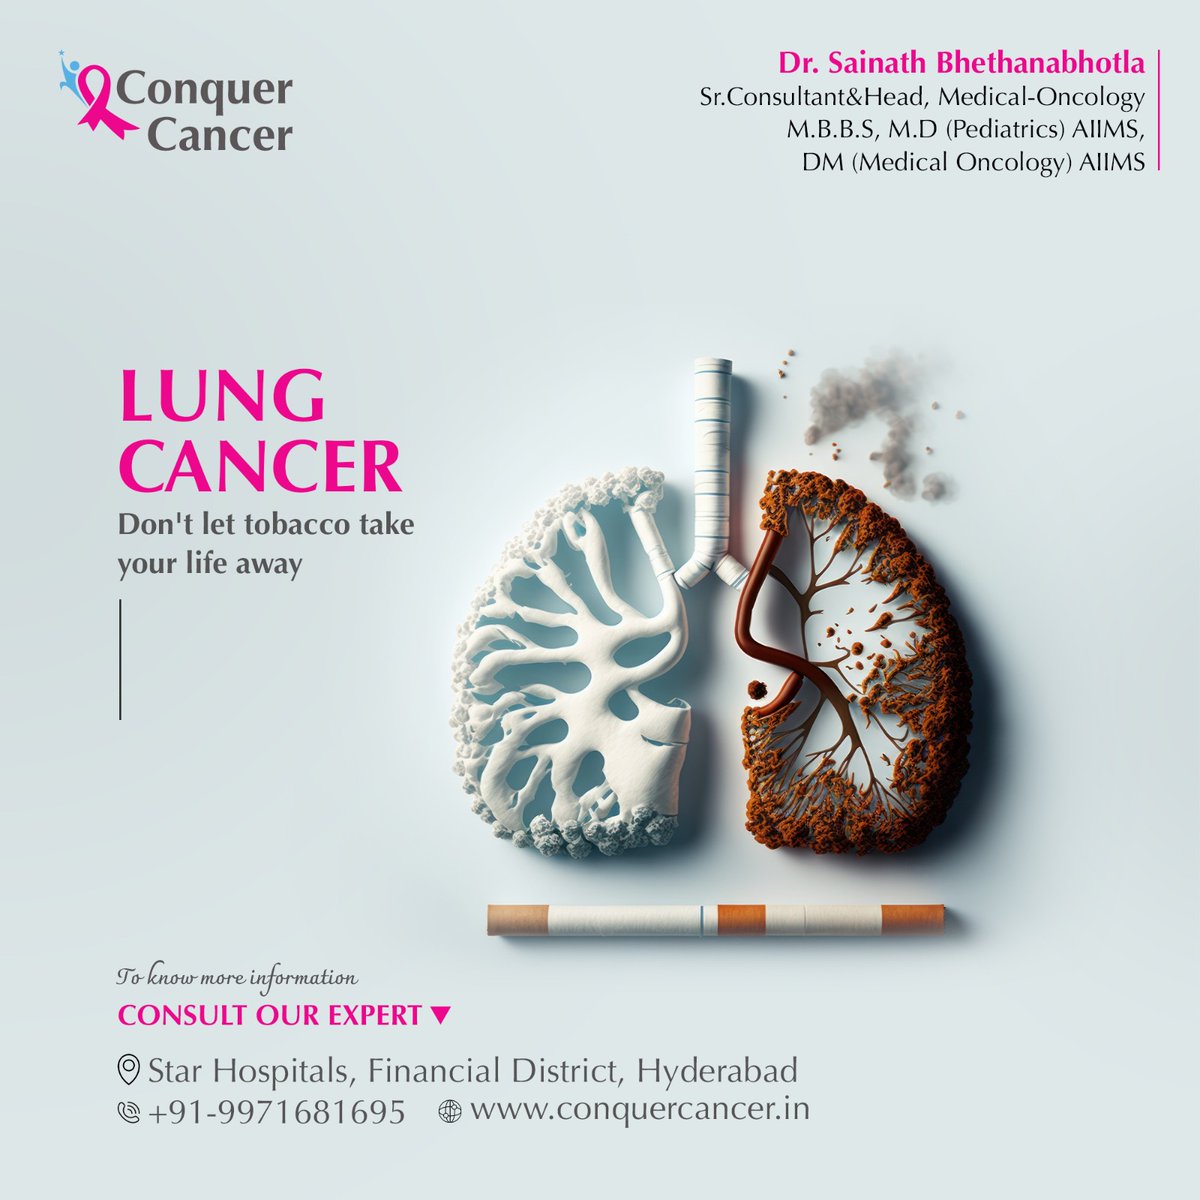 Don't let tobacco take your life away. Together, we fight against lung cancer to bring hope, awareness, and support. Join us in the battle for a tobacco-free future. 
conquercancer.in
#ConquerCancer #CancerPrevention #HealthierLifestyle #CancerAwareness